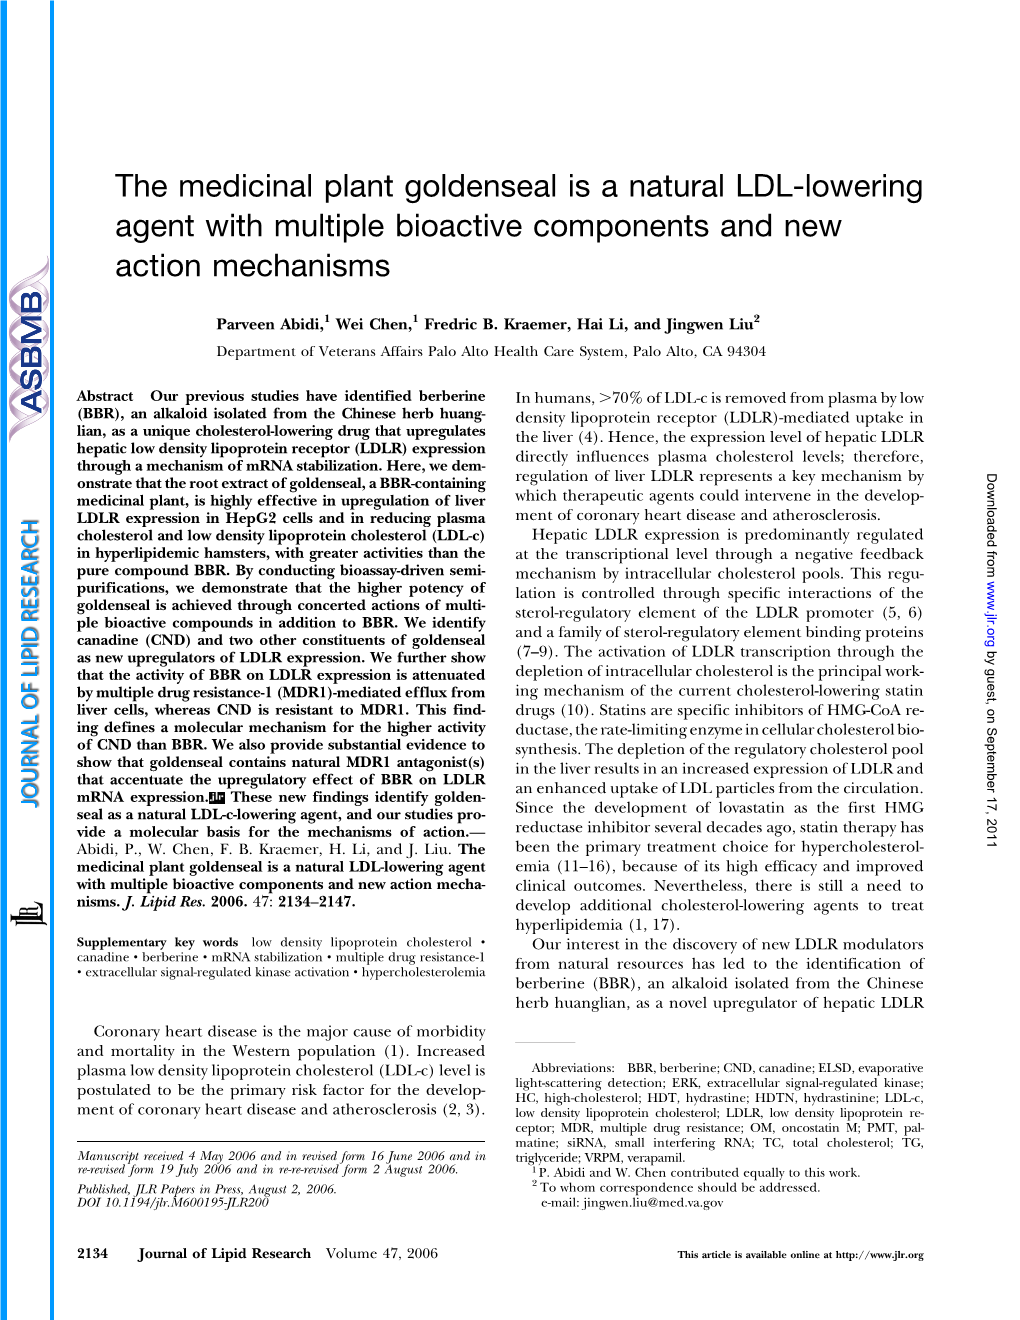 The Medicinal Plant Goldenseal Is a Natural LDL-Lowering Agent with Multiple Bioactive Components and New Action Mechanisms